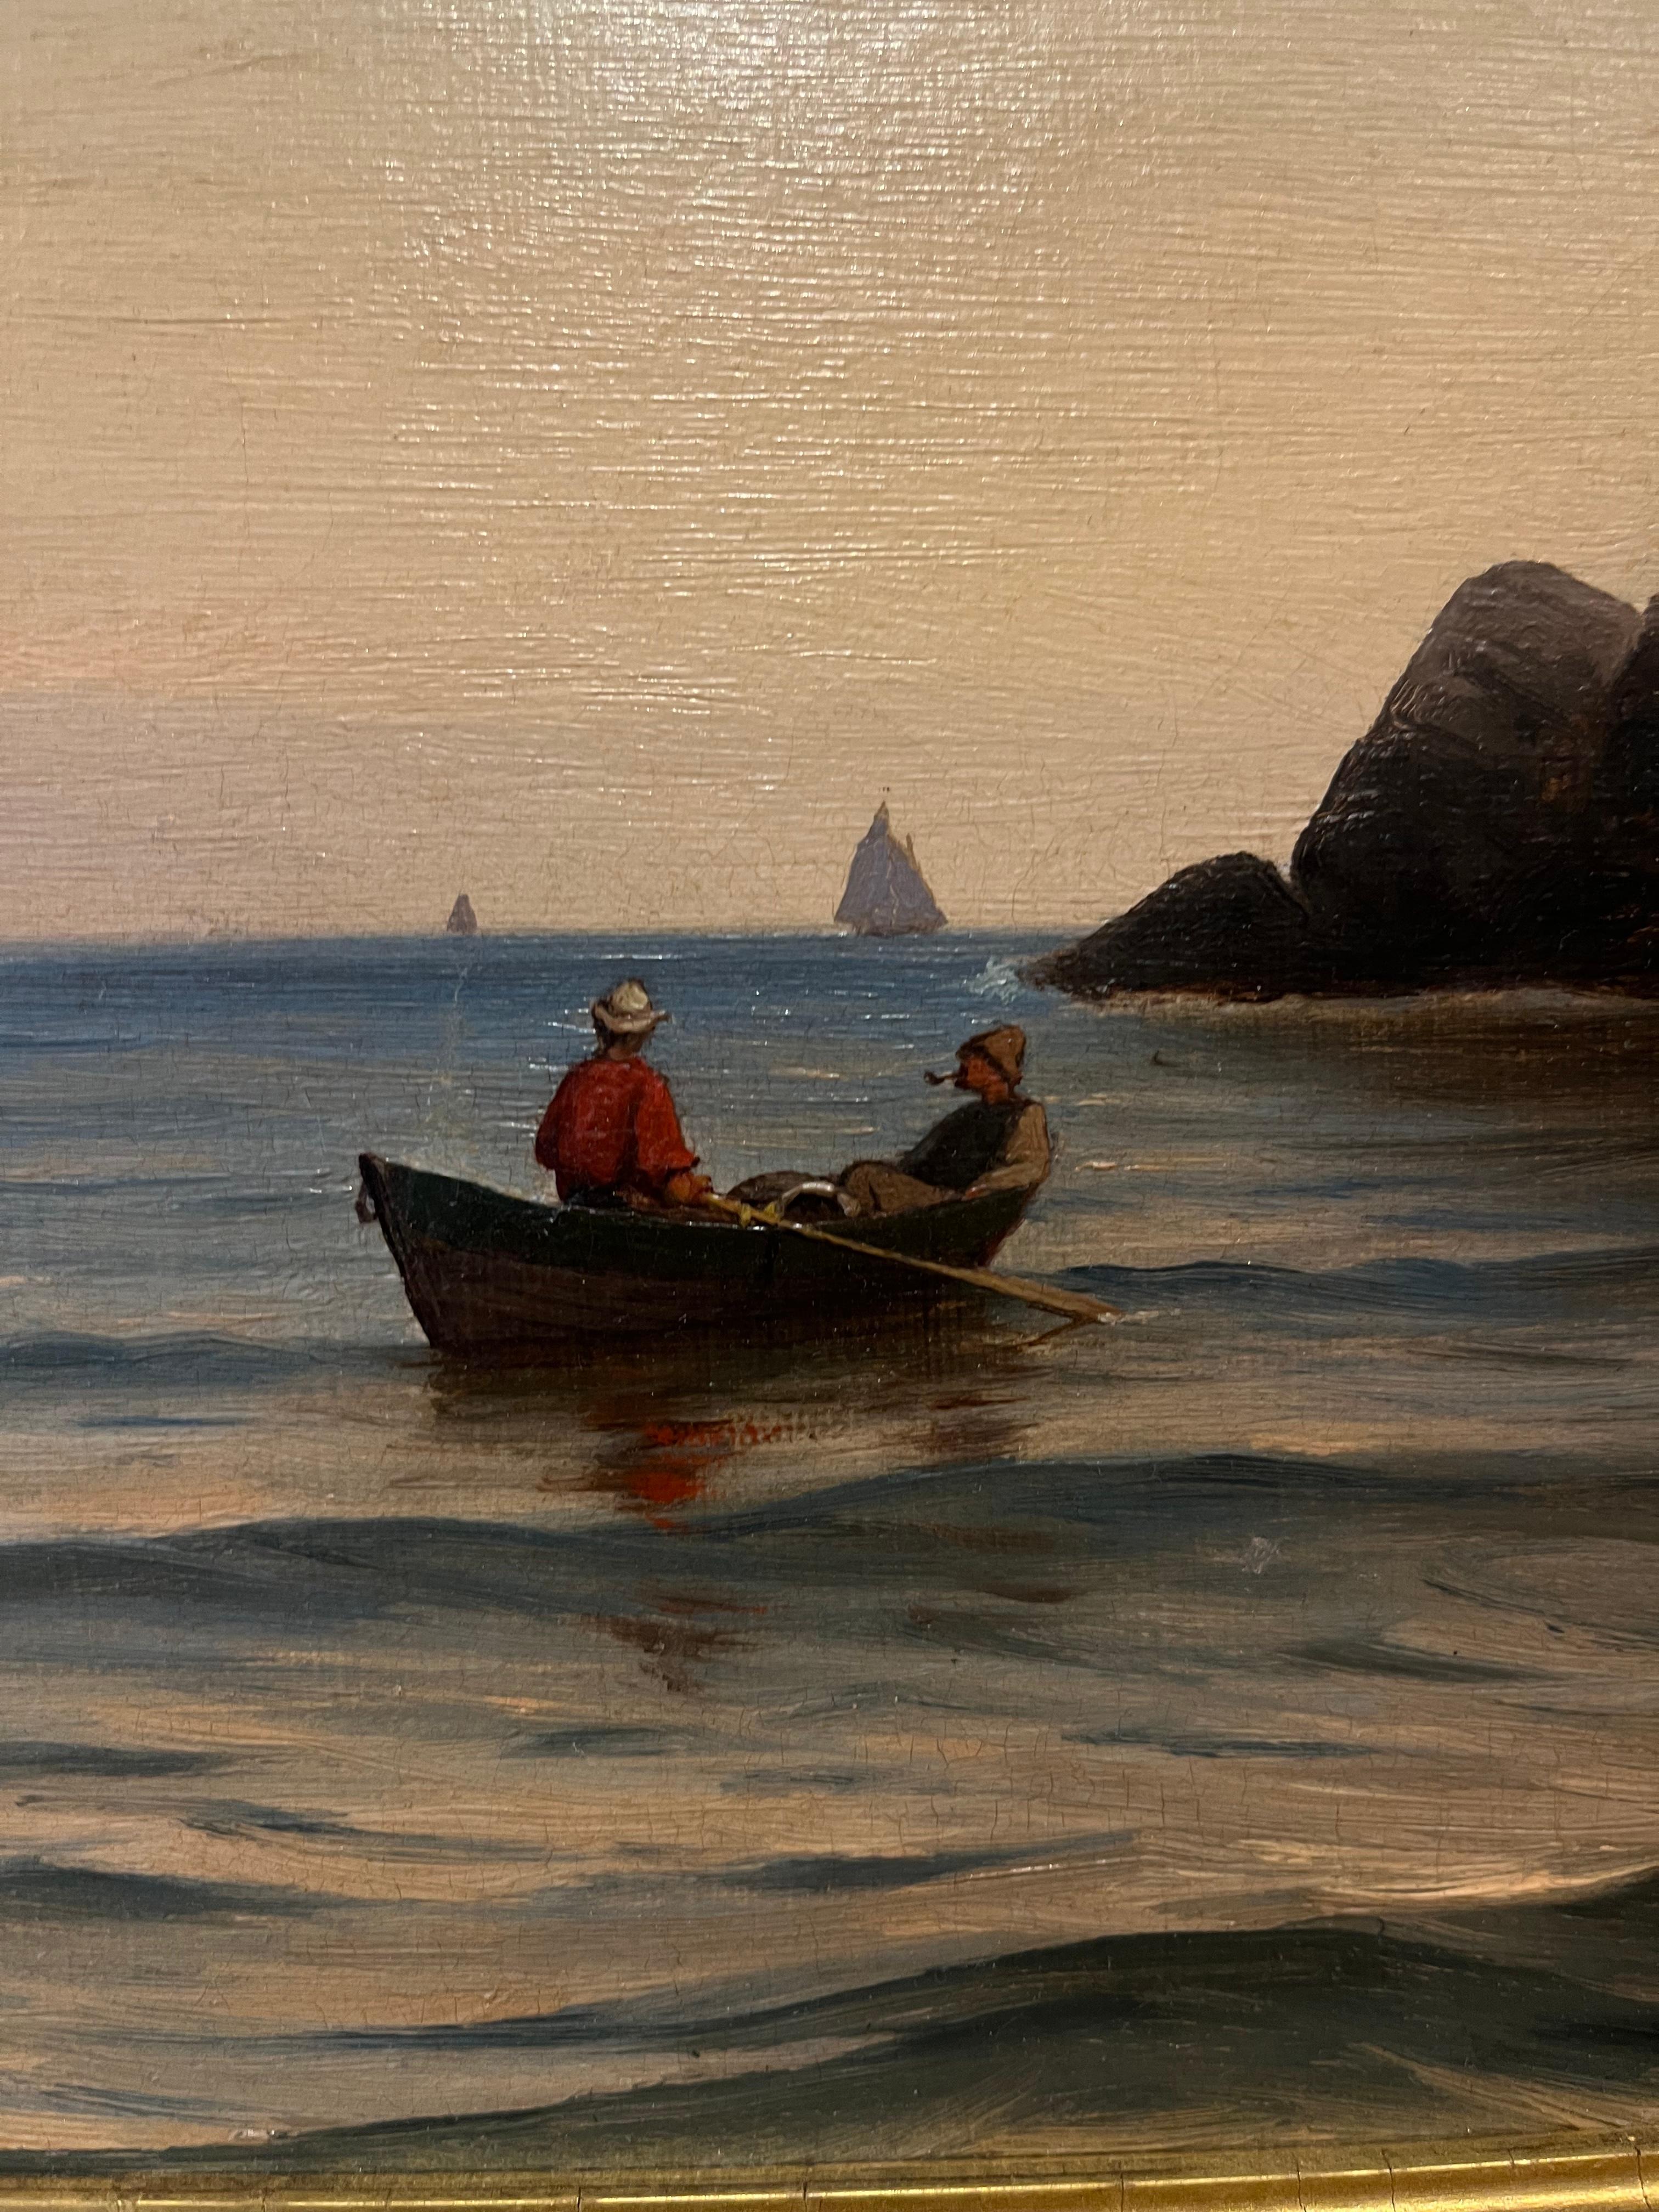 This coastal landscape is done by the famed painted William Frederick De Haas (1830-1880). This painting shows two men in a canoe paddling off the cliff shore in the foreground with sailboats in the background. The way that this painting captures